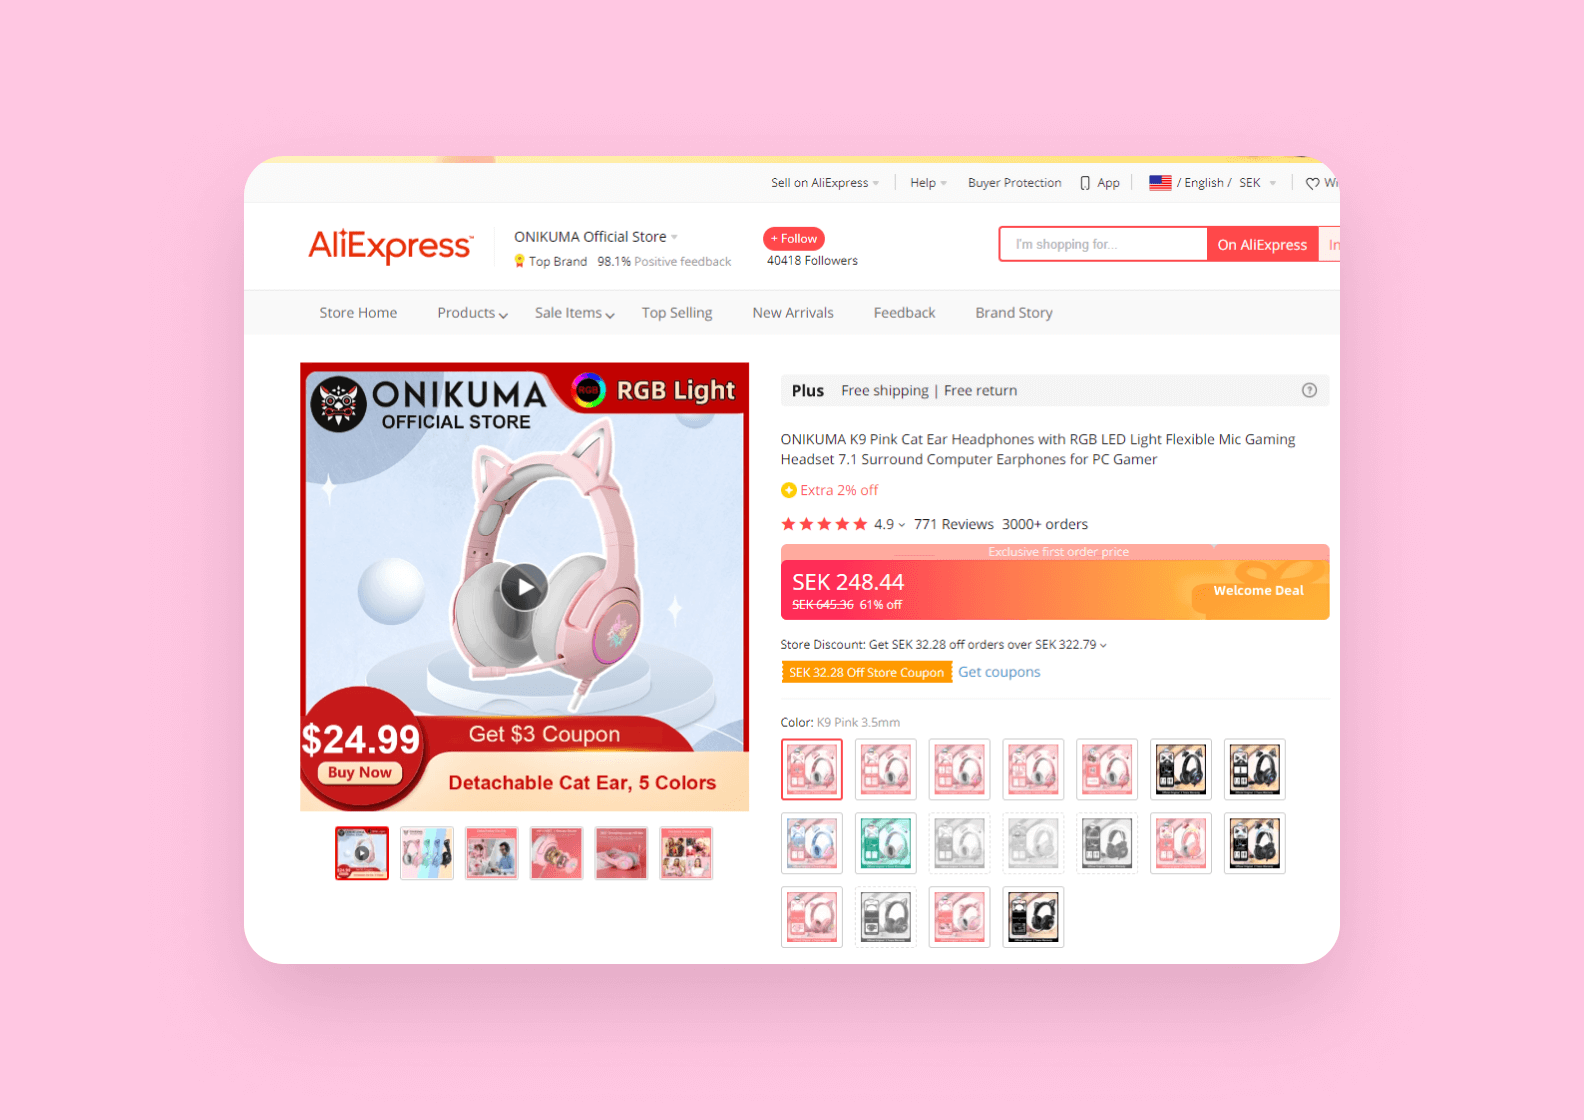 Selling a product on AliExpress